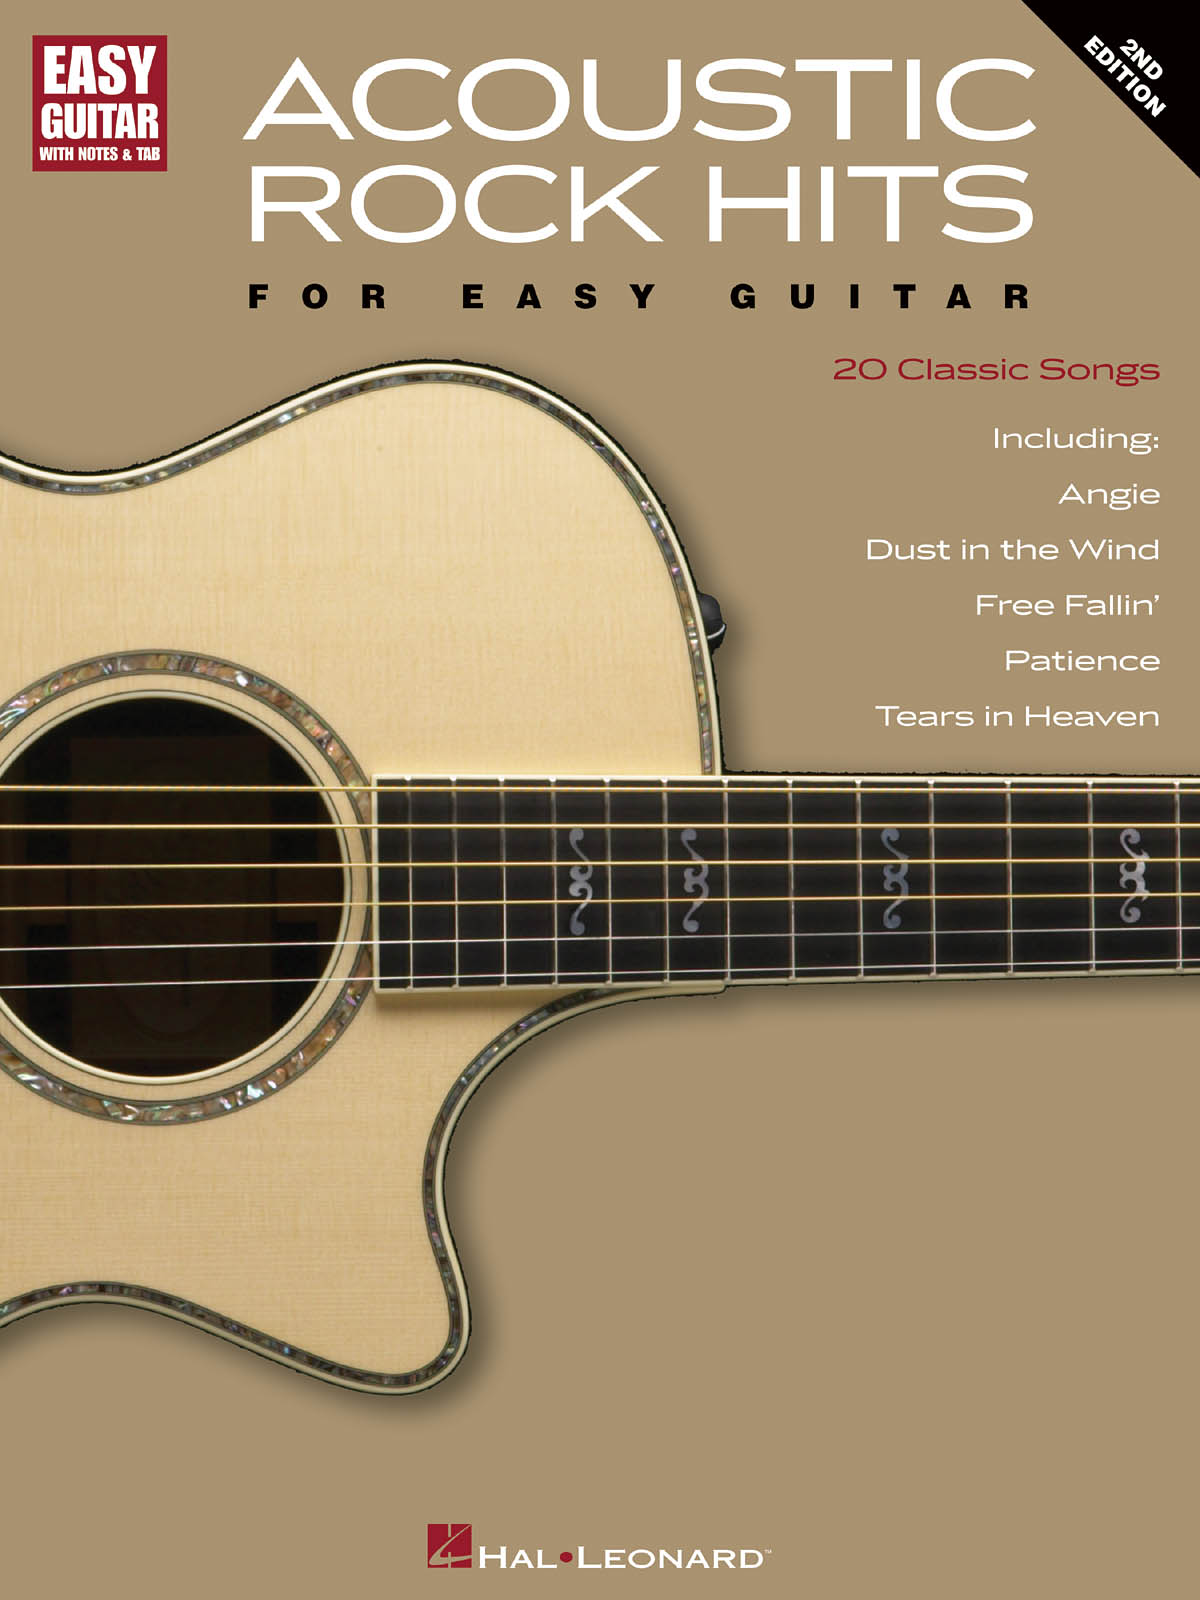 Acoustic Rock Hits For Easy Guitar 2nd edition - noty na kytaru